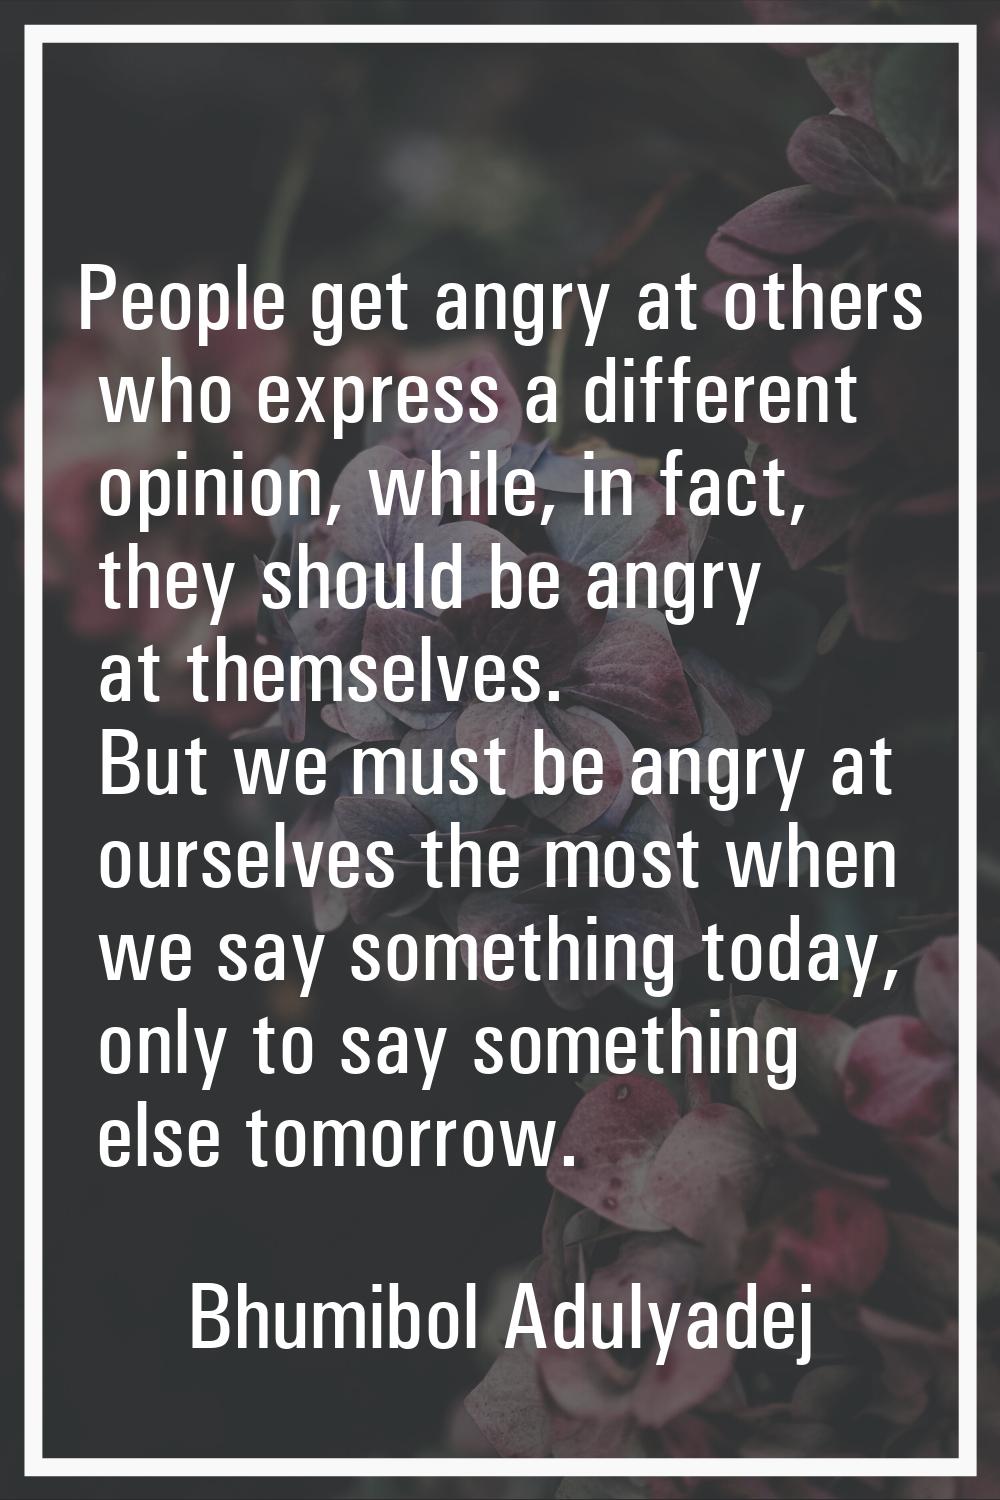 People get angry at others who express a different opinion, while, in fact, they should be angry at